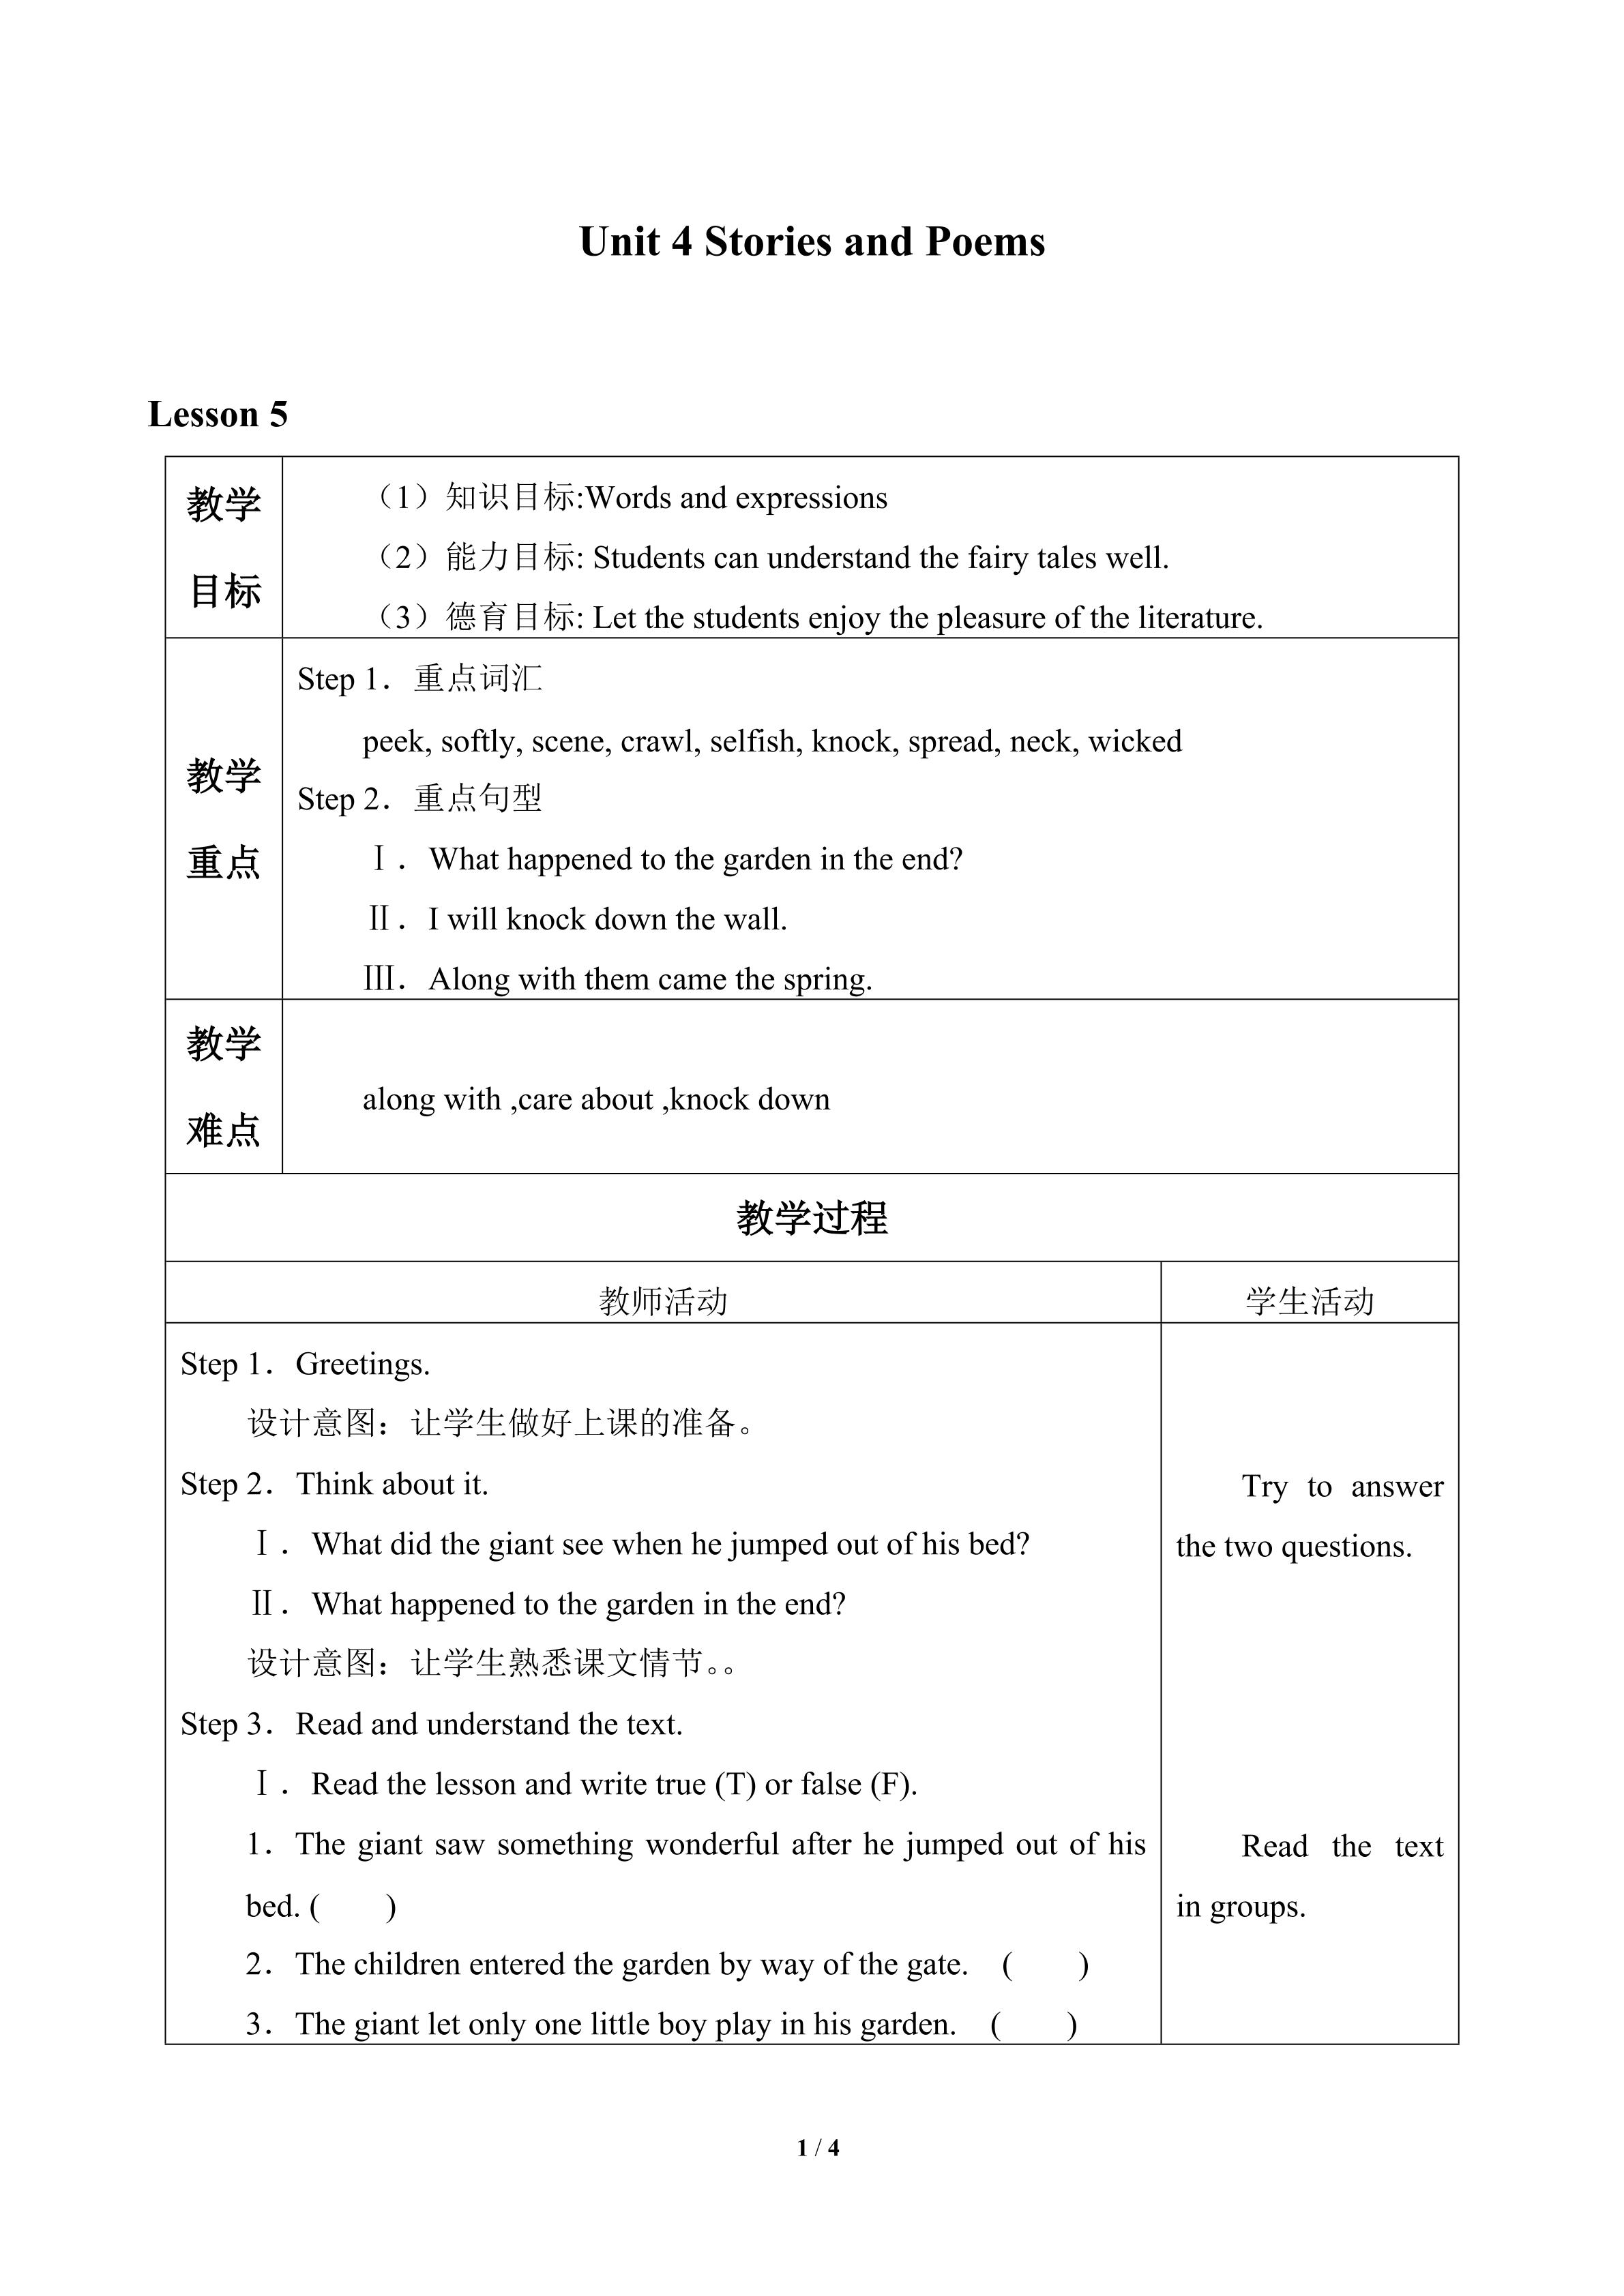 Unit 4 Stories and Poems_教案5